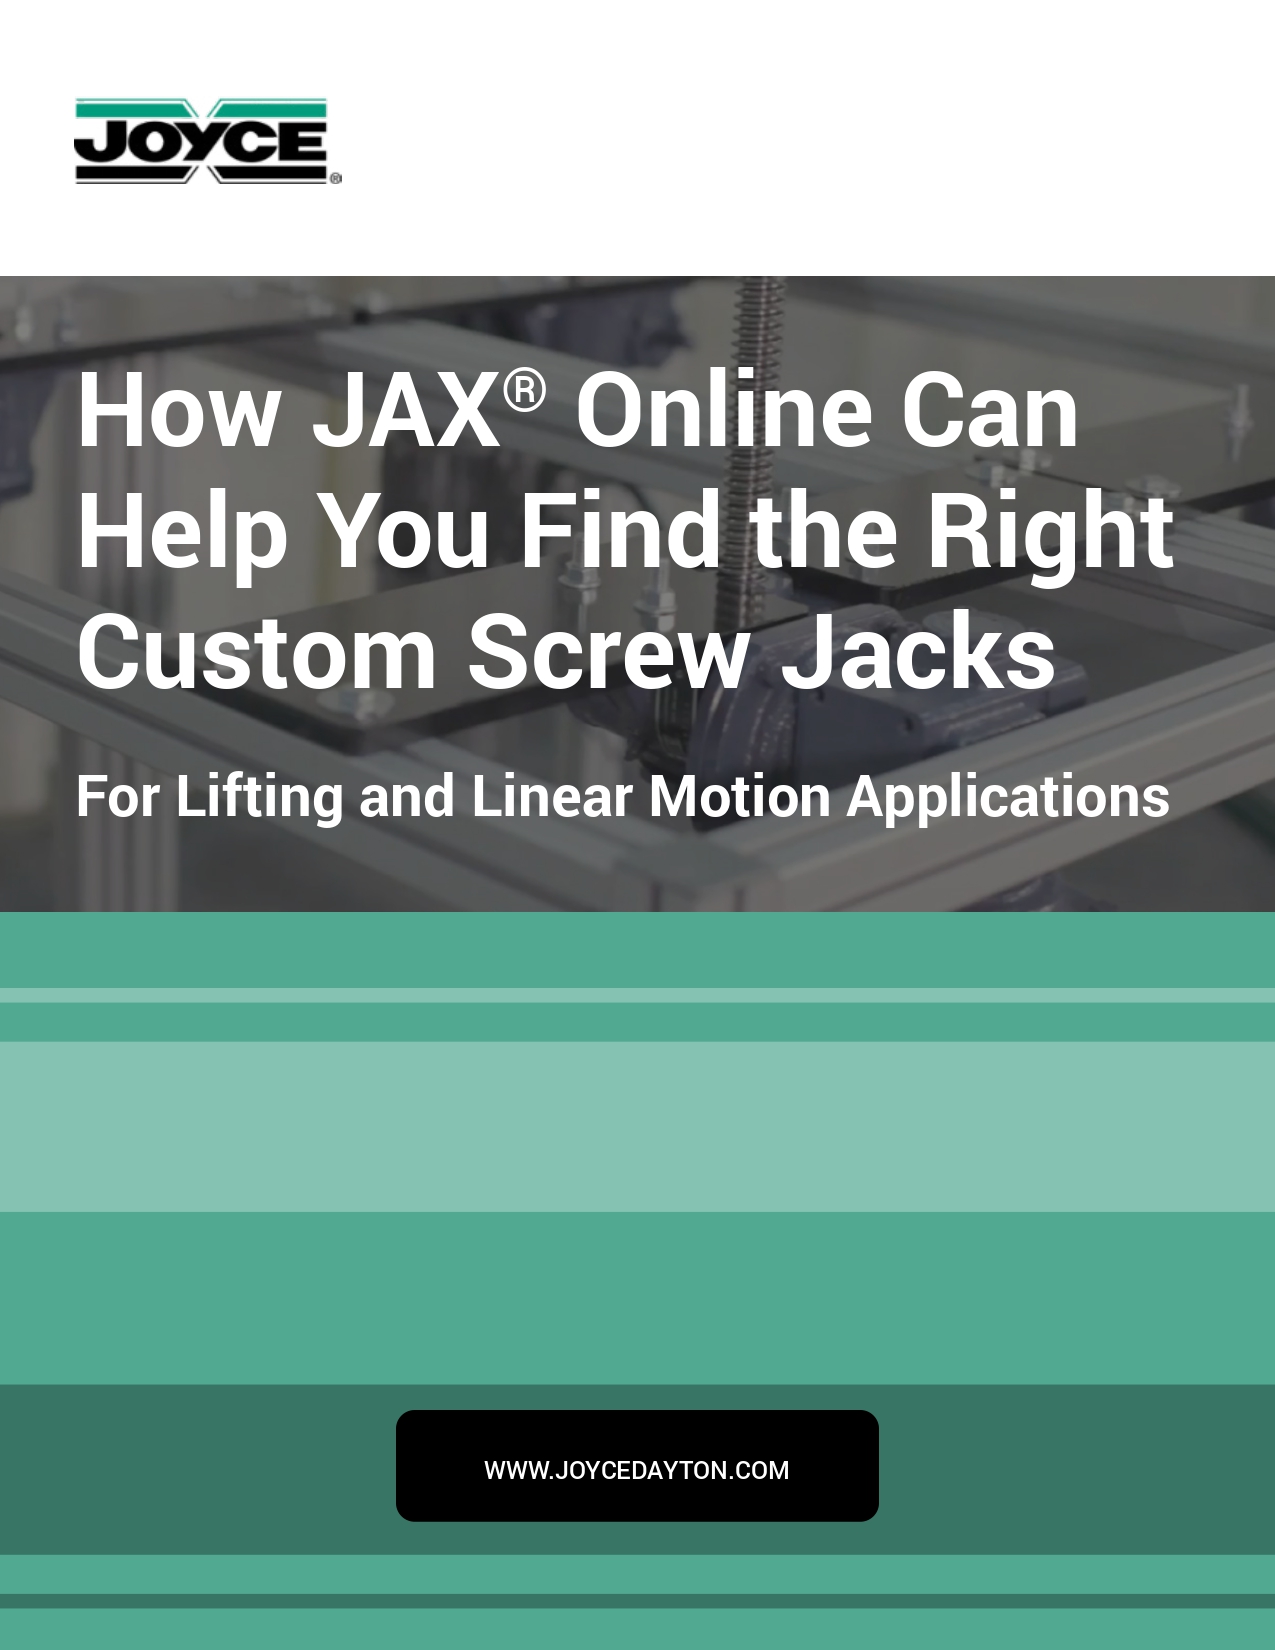 How JAX Online Can Help You Find the Right Custom Screw Jacks For Lifting and Linear Motion Applications